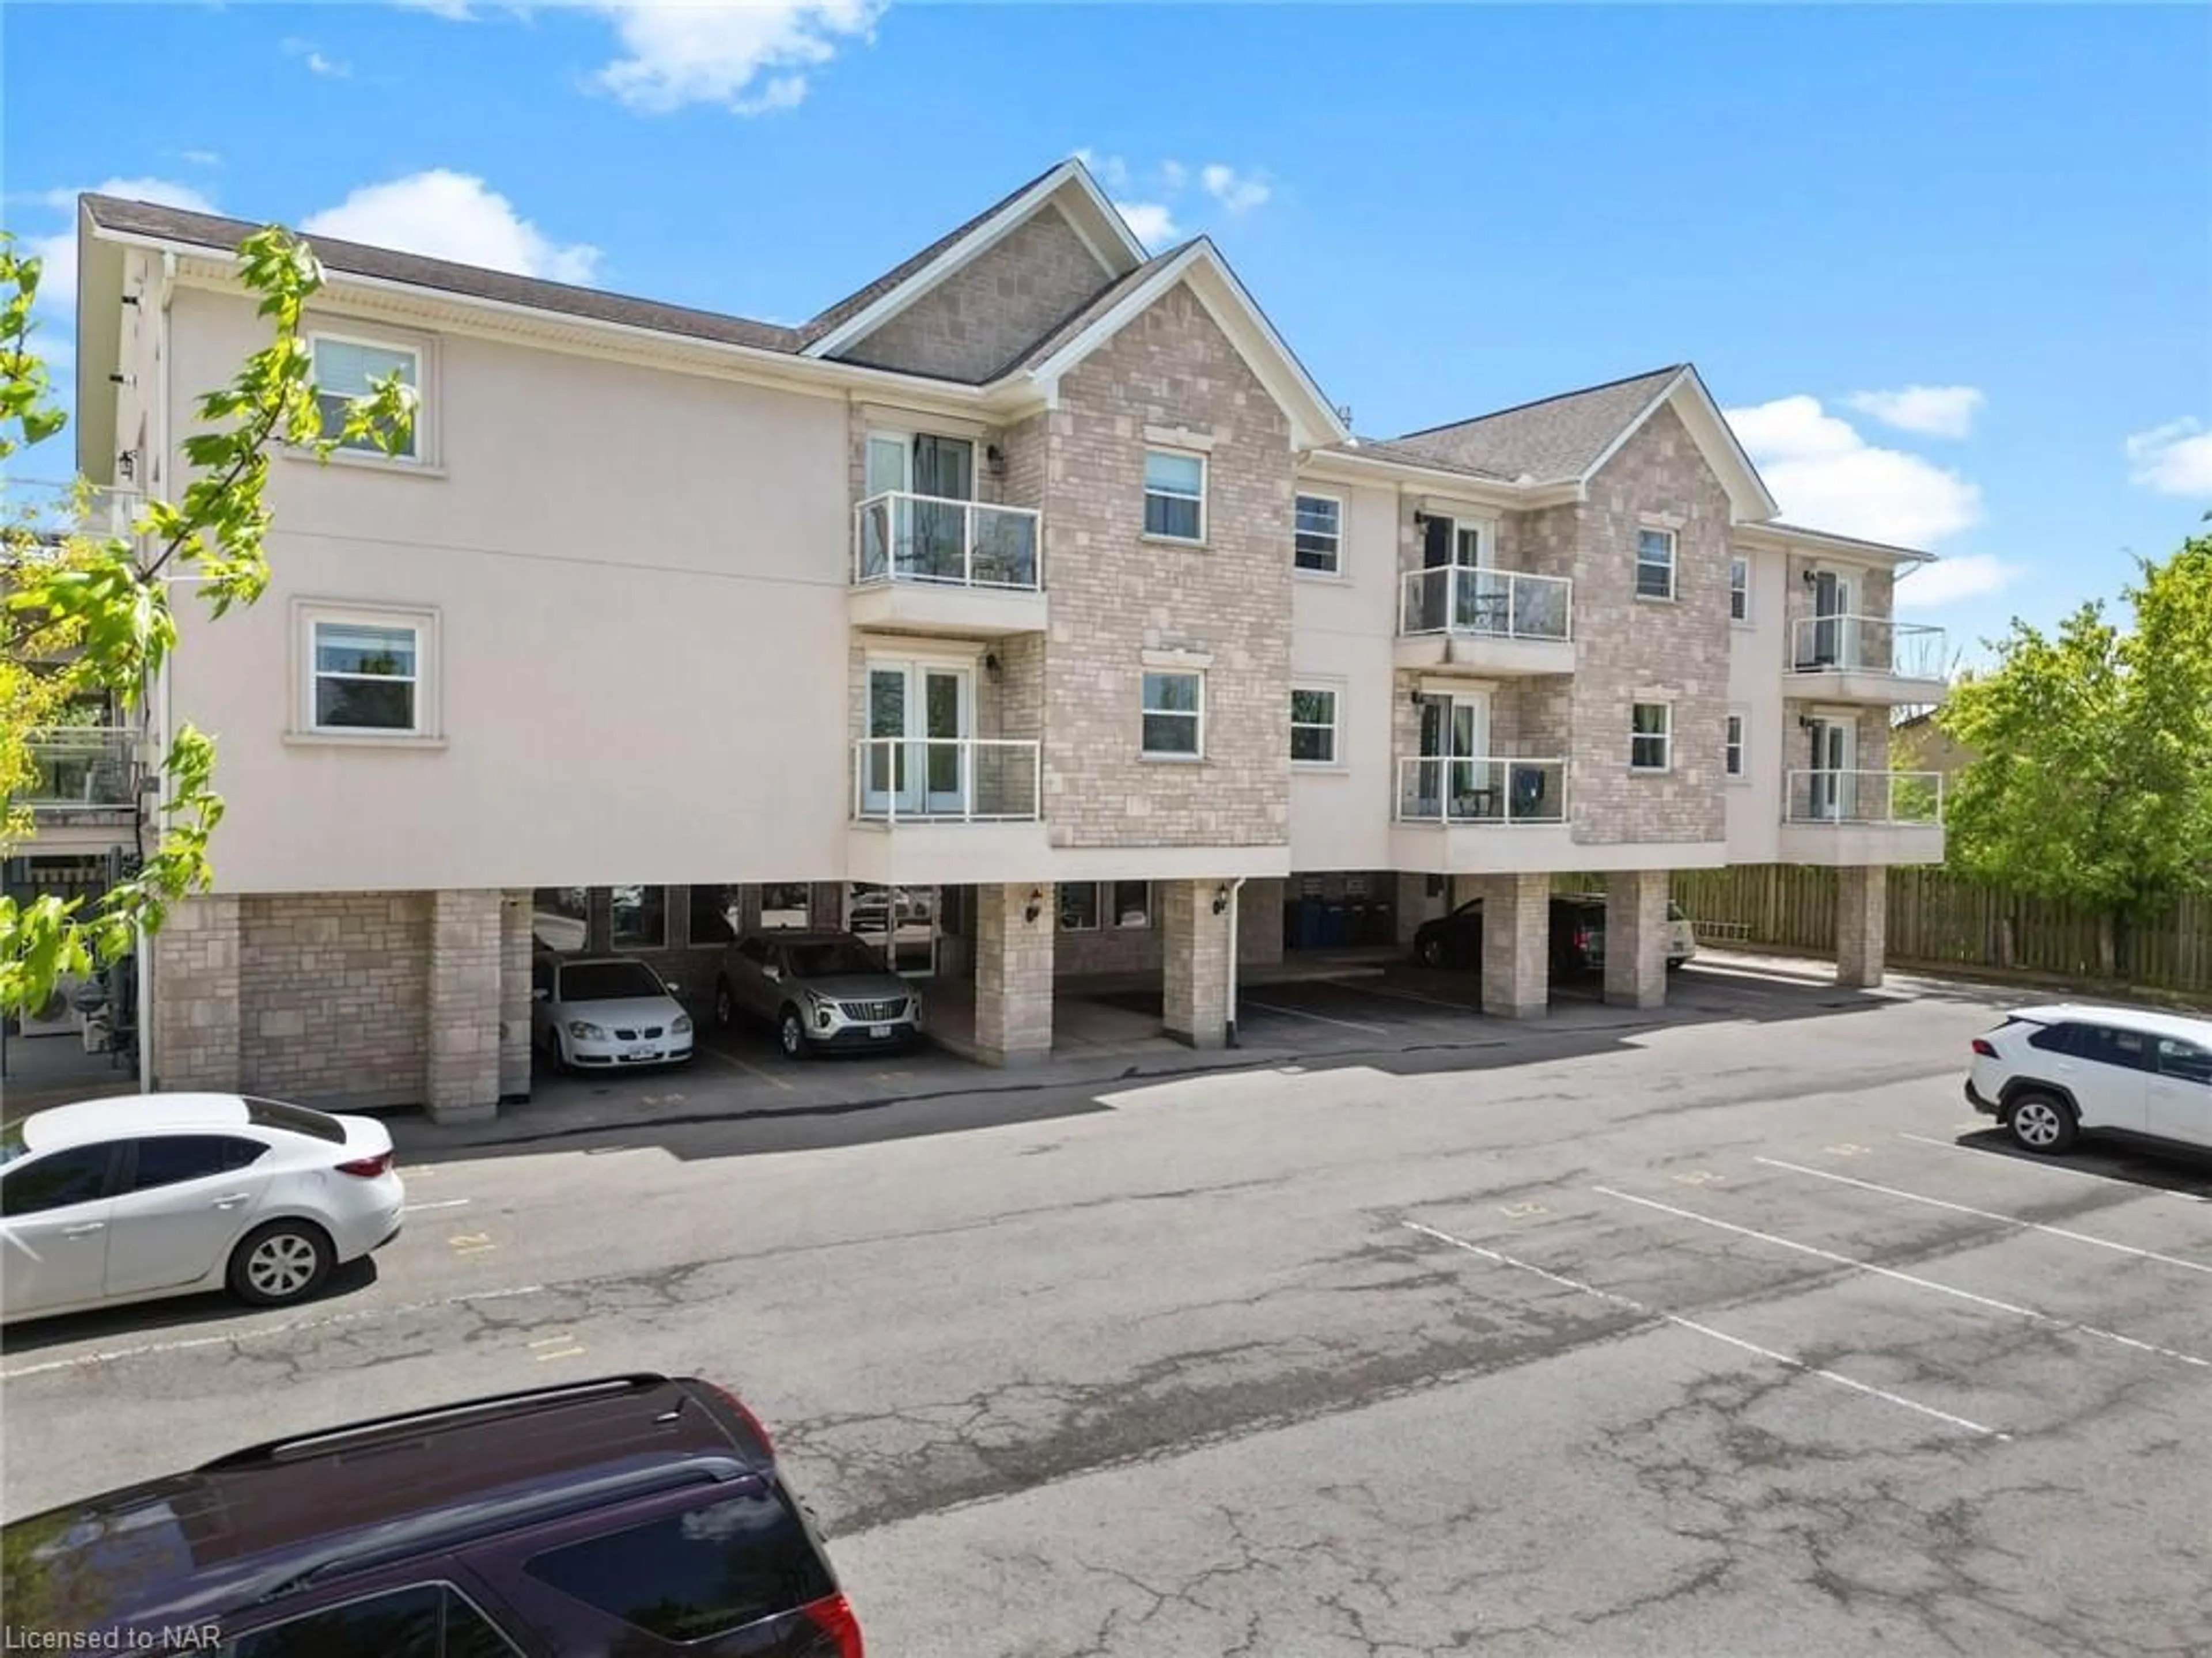 A pic from exterior of the house or condo for 6928 Ailanthus Ave #207, Niagara Falls Ontario L2G 4C8